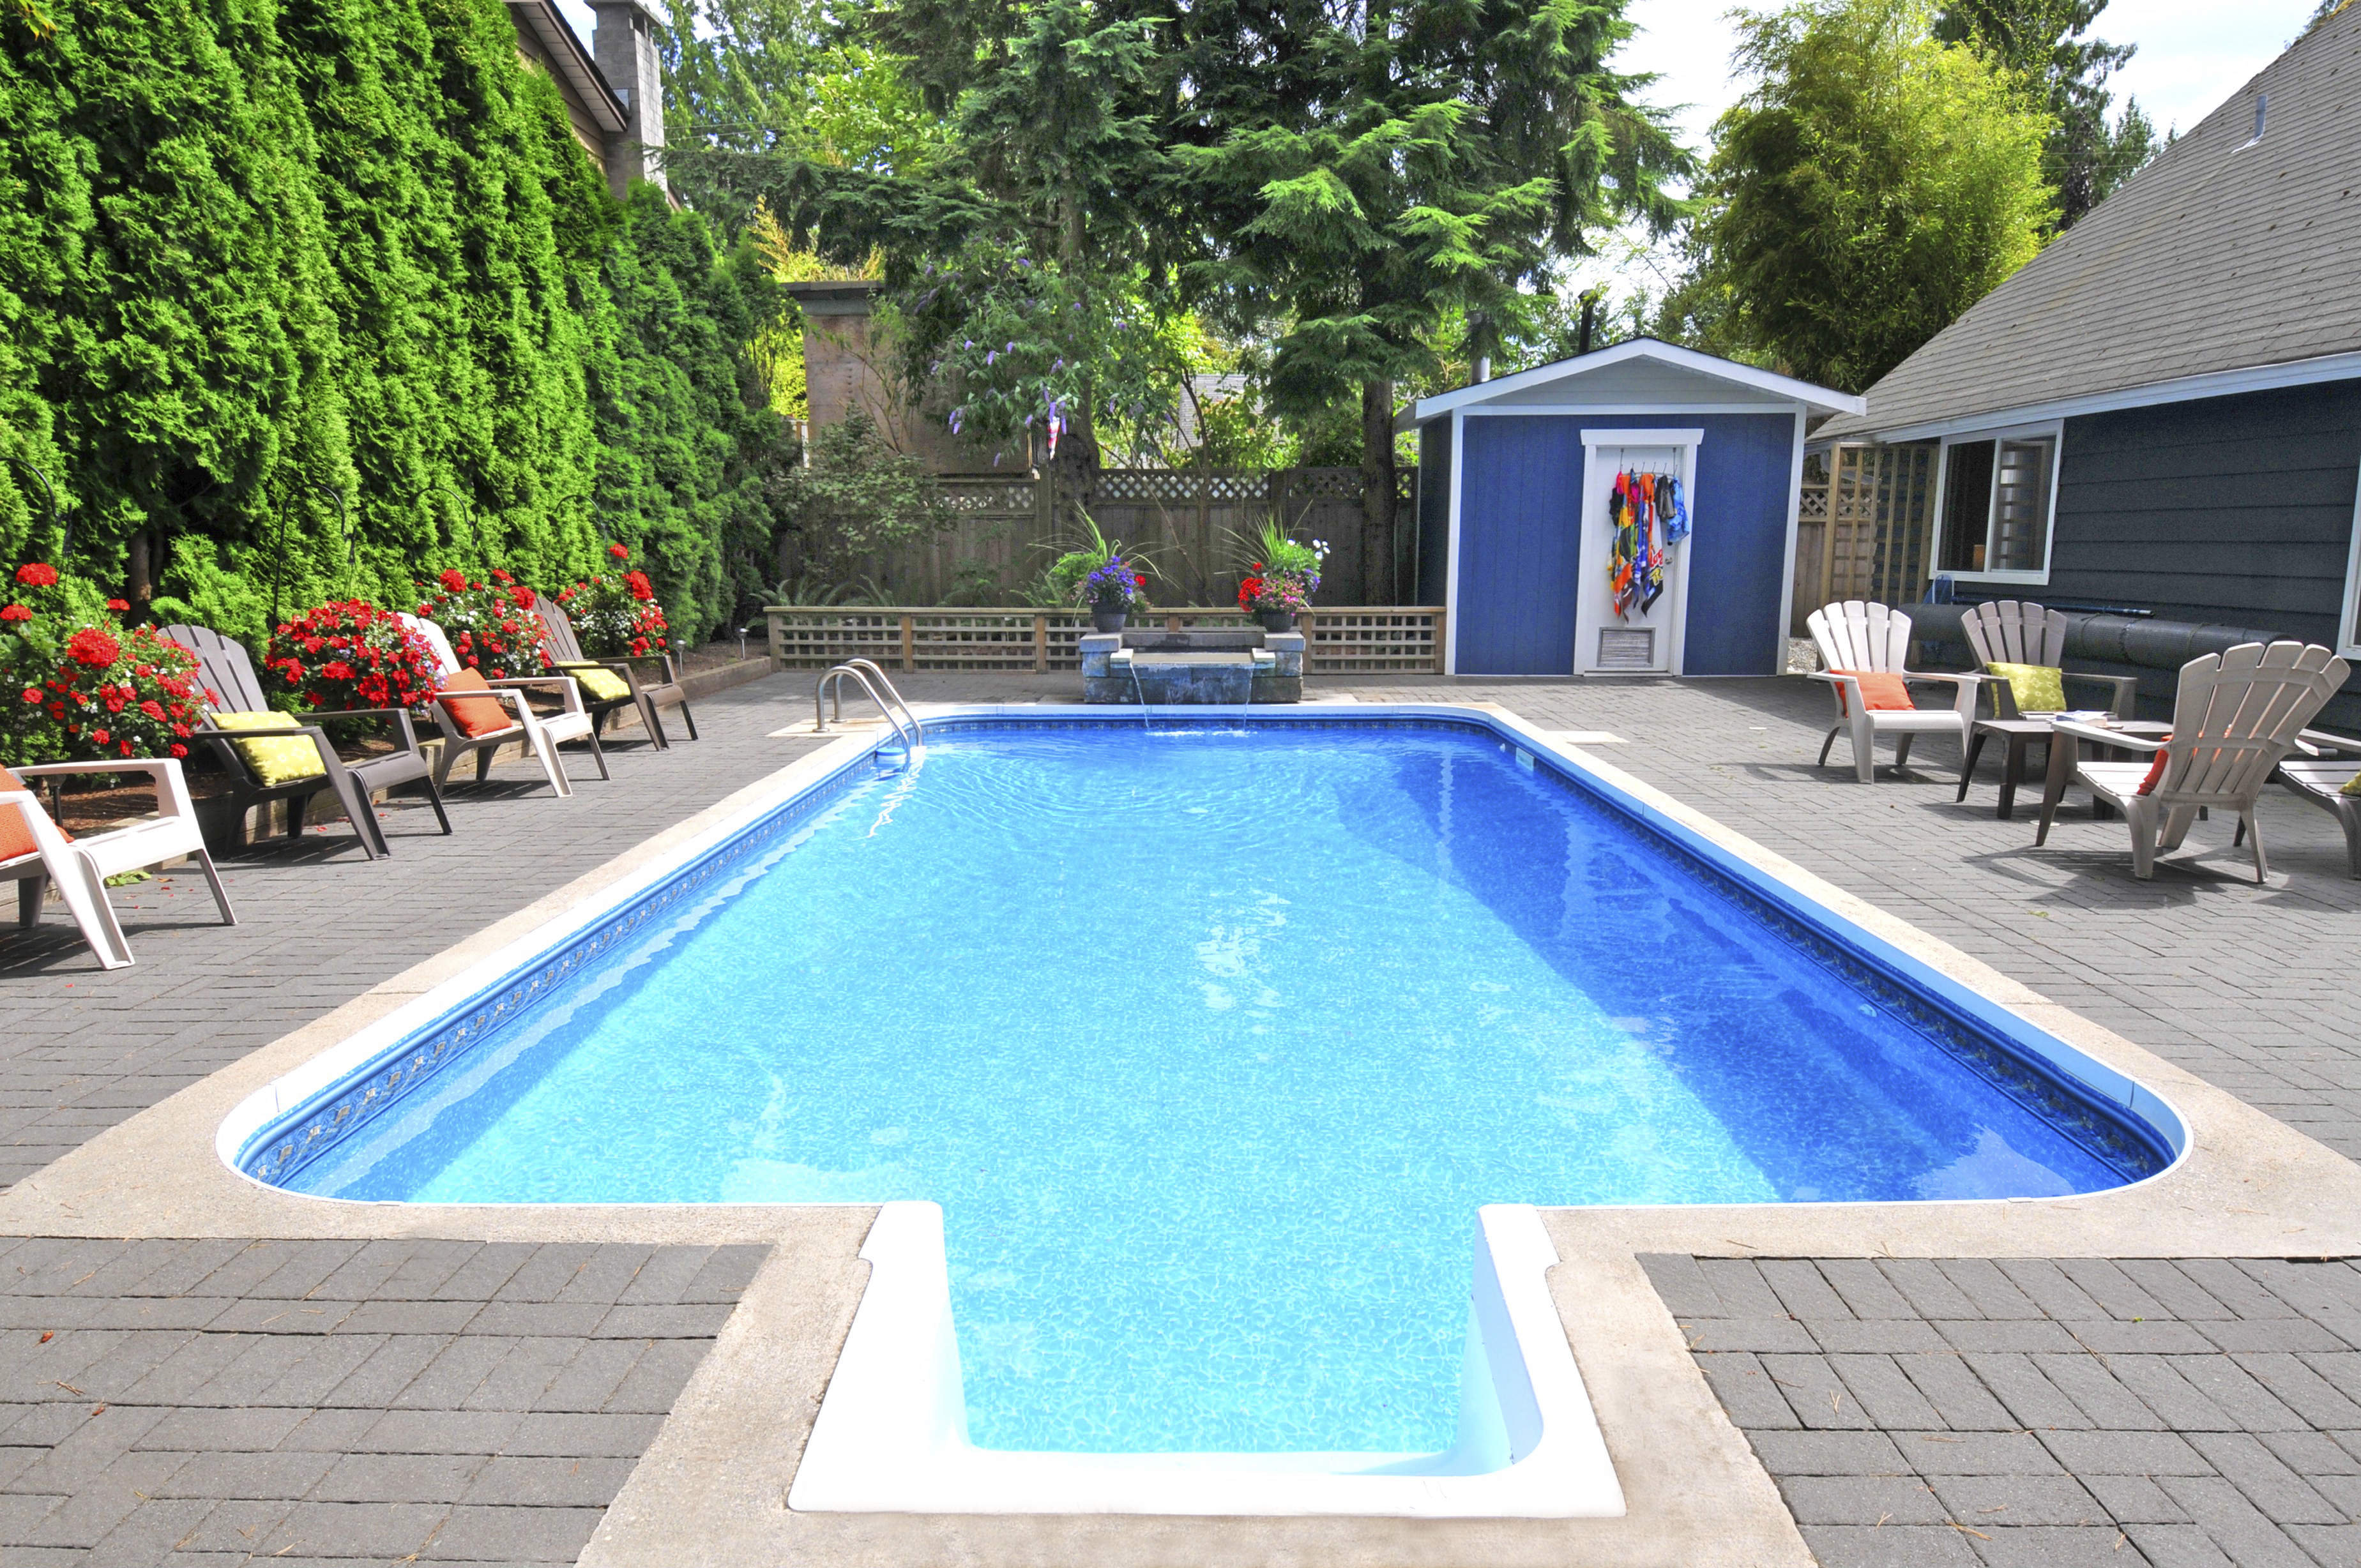 Should I Use a Gas or Electric Pool Heater?